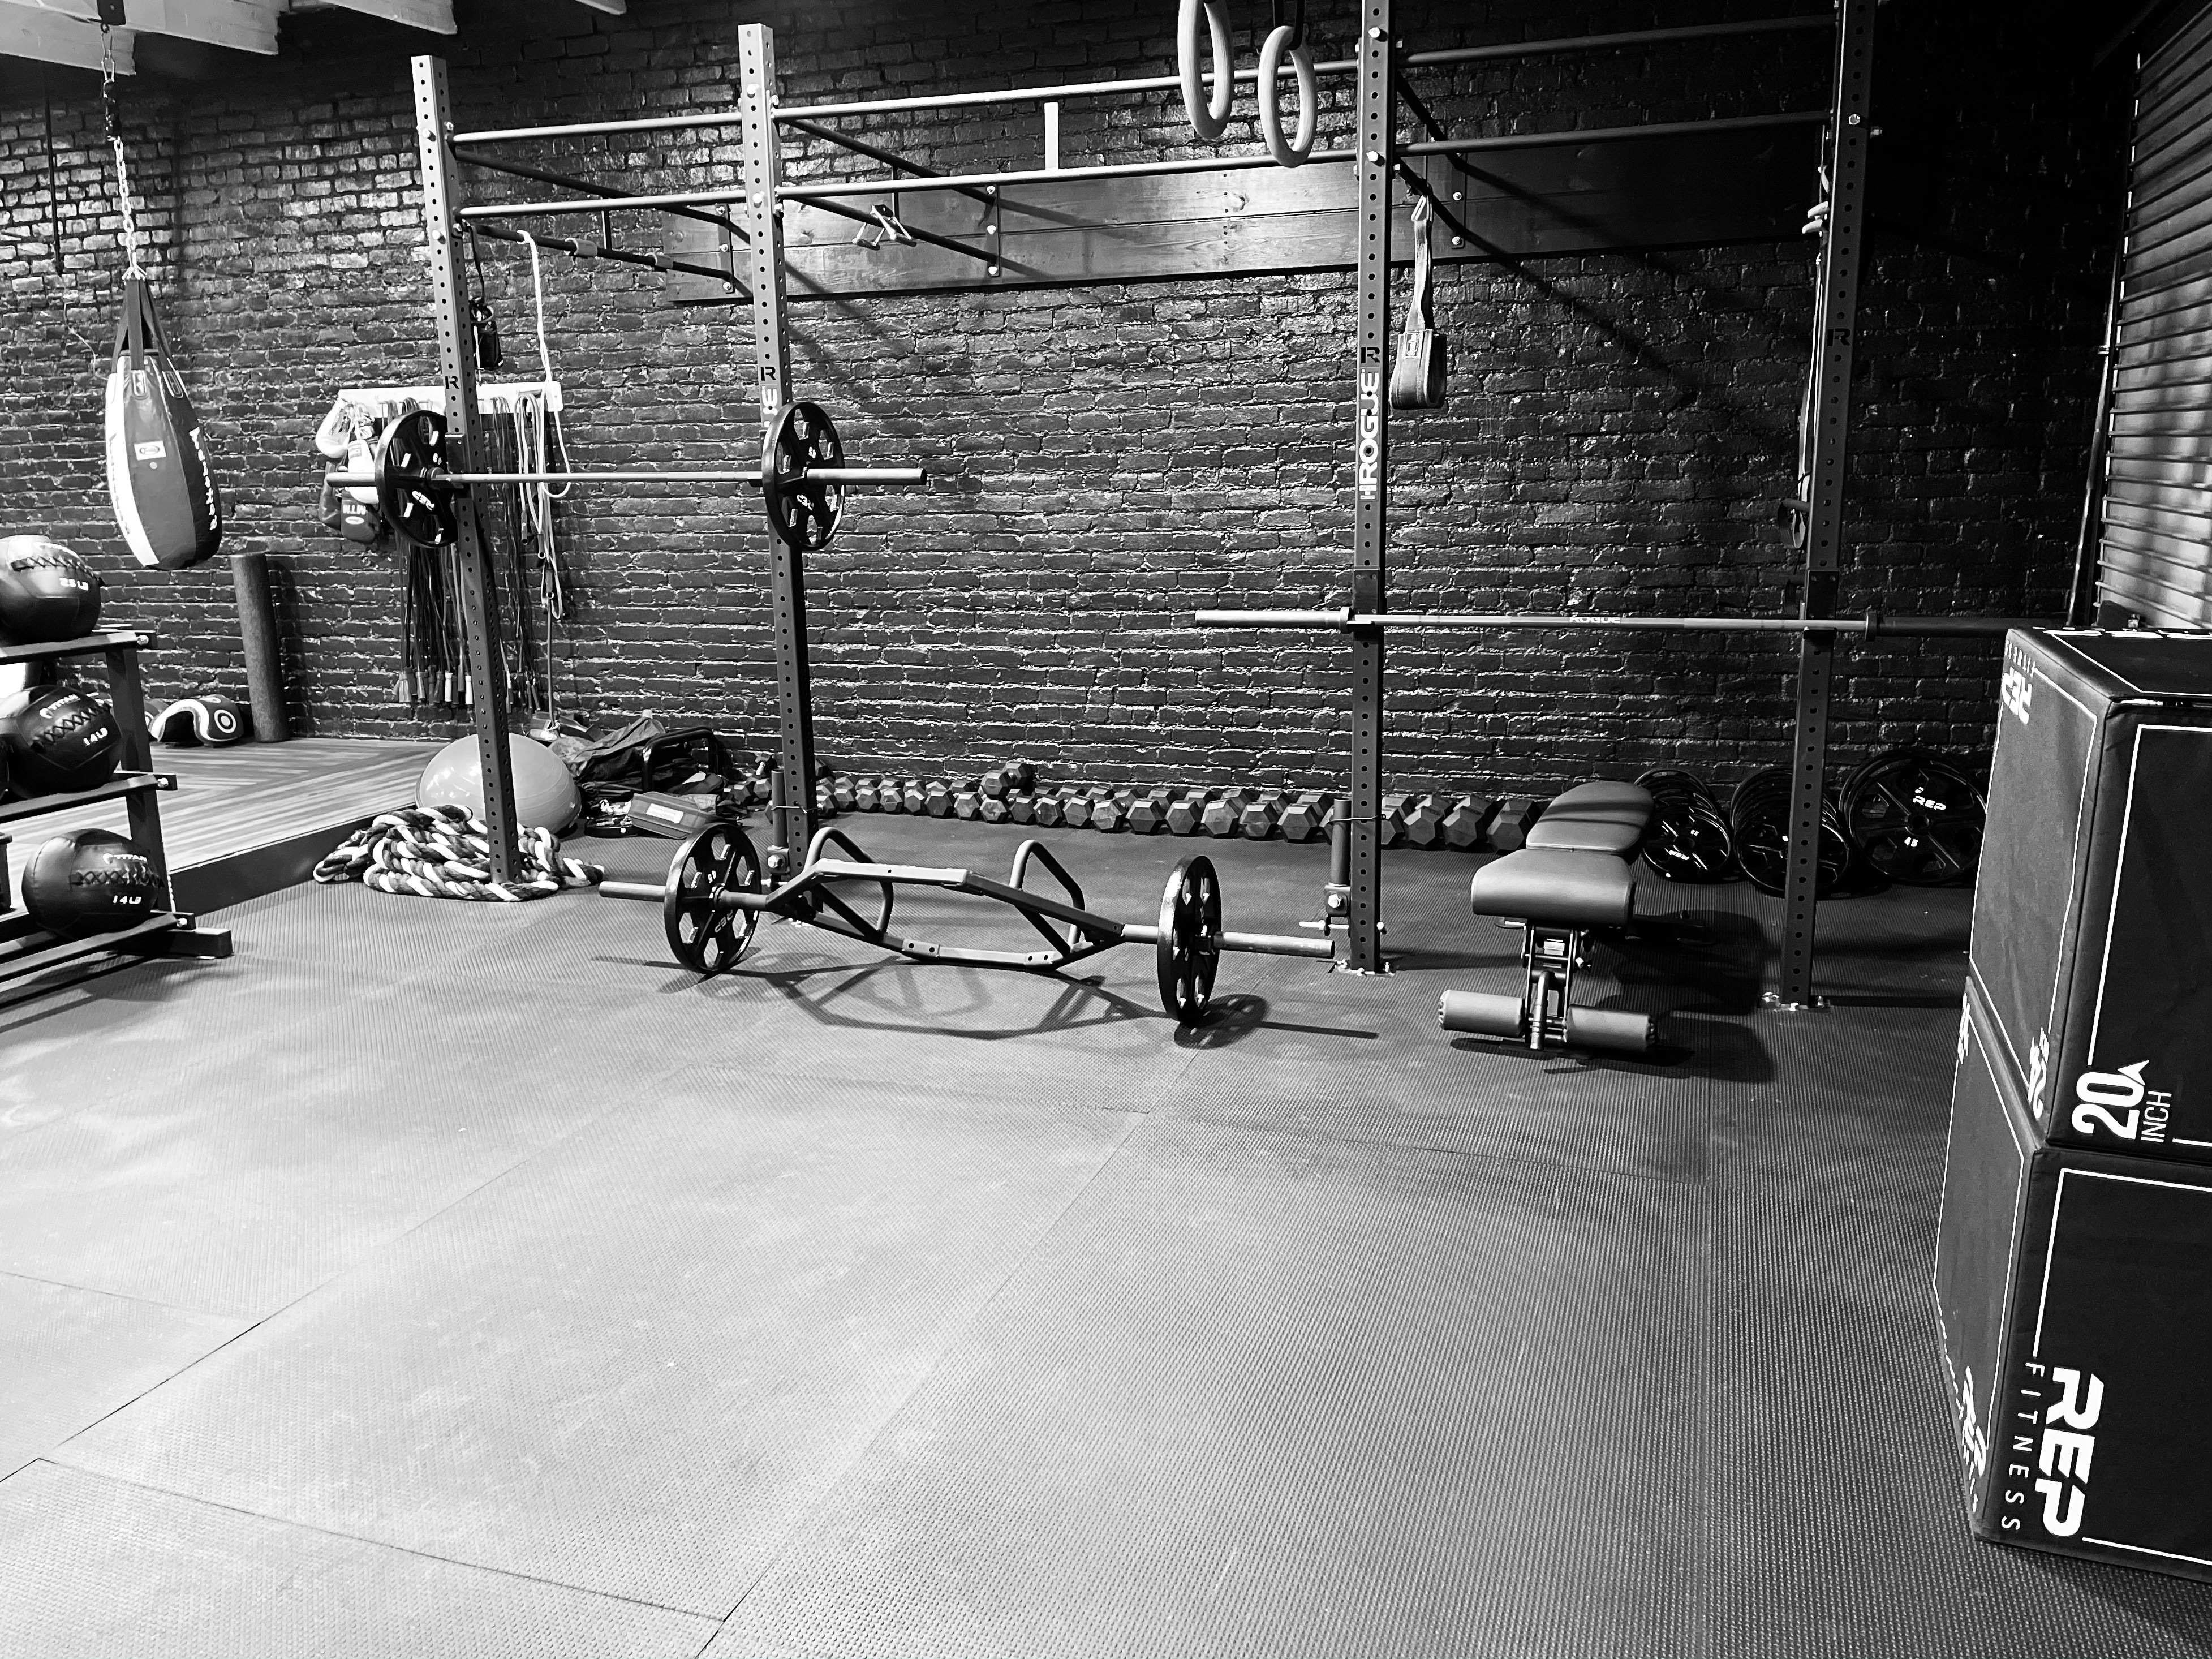  <h2>STRENGTH AND CONDITIONING</h2>
            This class provides a progressive
            structured program that will
            move you through a series
            of intervals on and off the
            equipment, incorporating
            kettlebells, dumbbells, and body
            weight exercises. These classes
            will fire up your metabolism,
            challenging your anaerobic
            capacity using multi-functional
            directional, explosive, strength
            and agility movements to shock
            your body and to push anyone to
            their limits.
            Be prepared to be surprised
            every time you come to class
            as we are constantly switching
            up the movements to shock
            your body and keep you burning
            calories well beyond the end of
            class! 